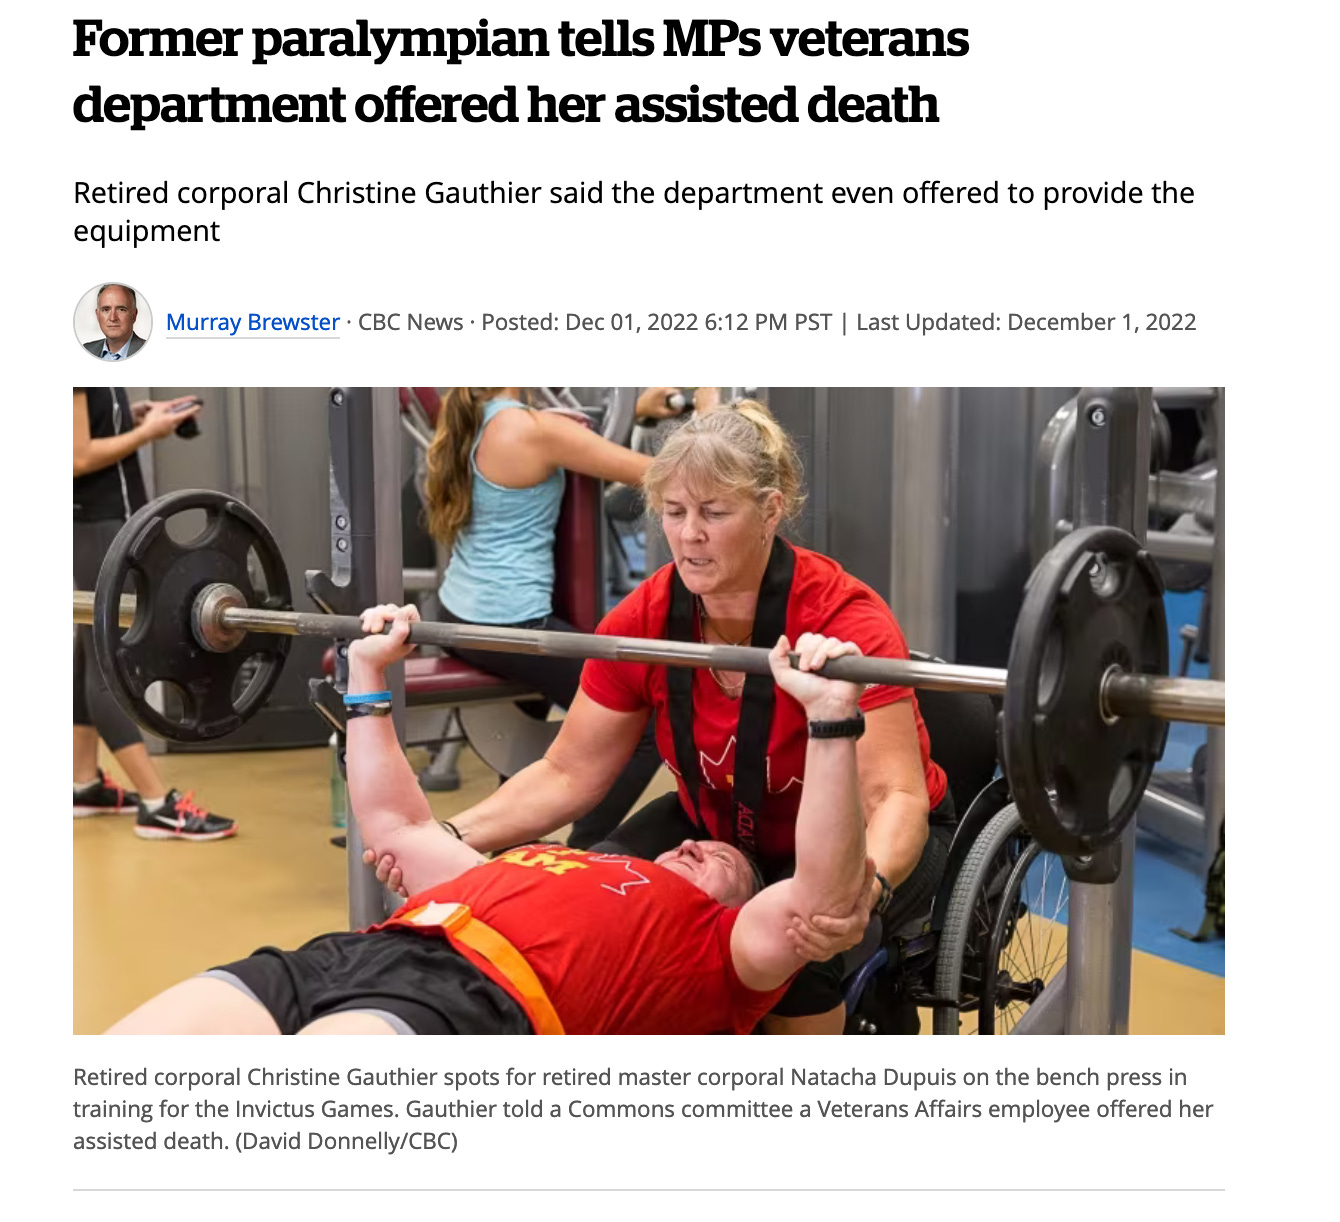 Former paralympian tells MPs veterans department offered her assisted death Retired corporal Christine Gauthier said the department even offered to provide the equipment Murray Brewster · CBC News · Posted: Dec 01, 2022 6:12 PM PST | Last Updated: December 1, 2022 Retired corporal Christine Gauthier spots for retired master corporal Natacha Dupuis on the bench press in training for the Invictus Games. Gauthier told a Commons committee a Veterans Affairs employee offered her assisted death. (David Donnelly/CBC)